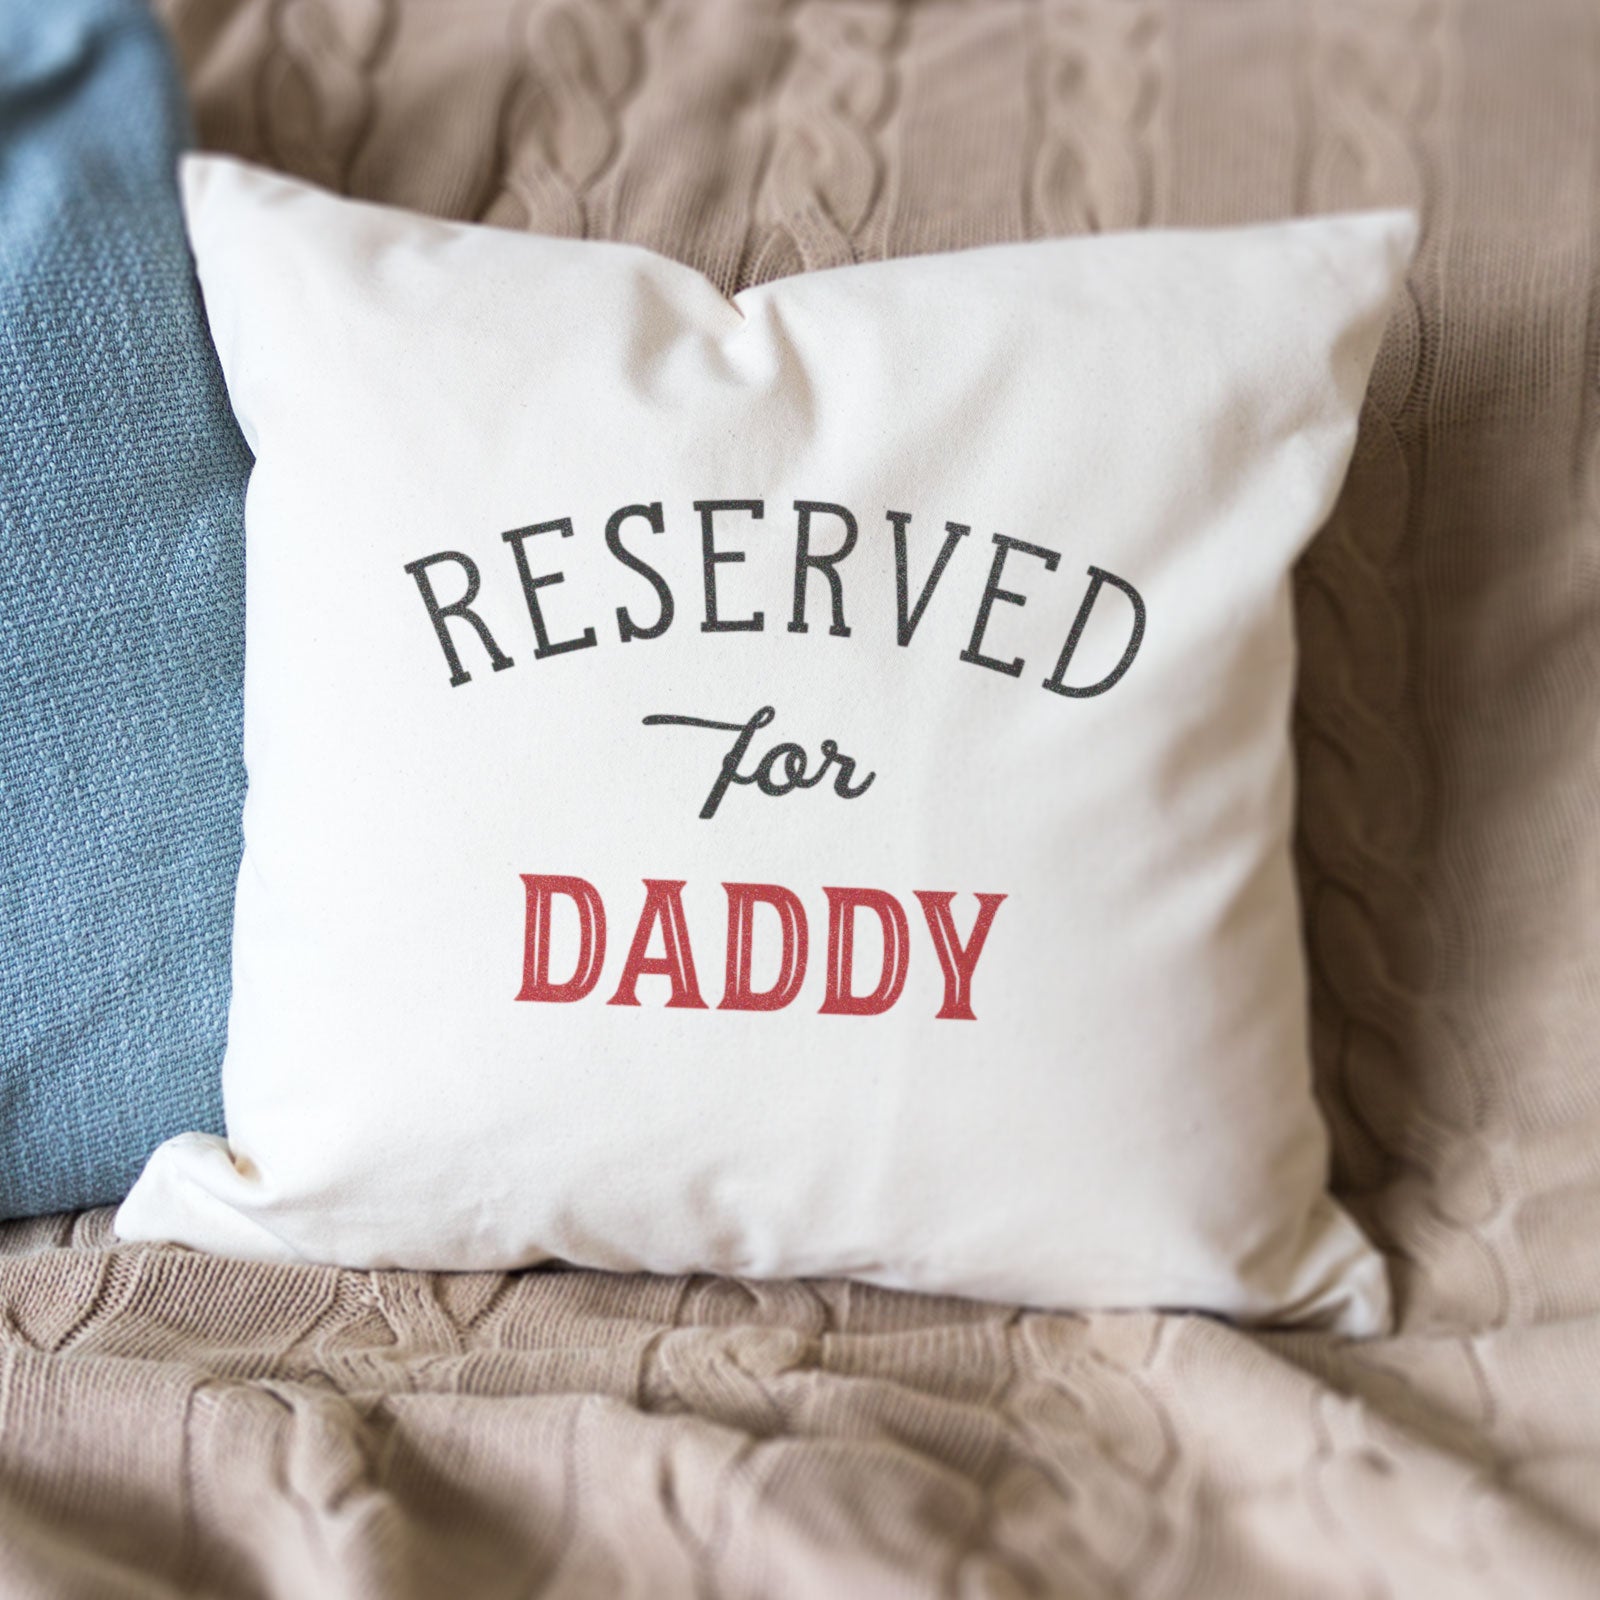 Reserved for Daddy Cushion Cover